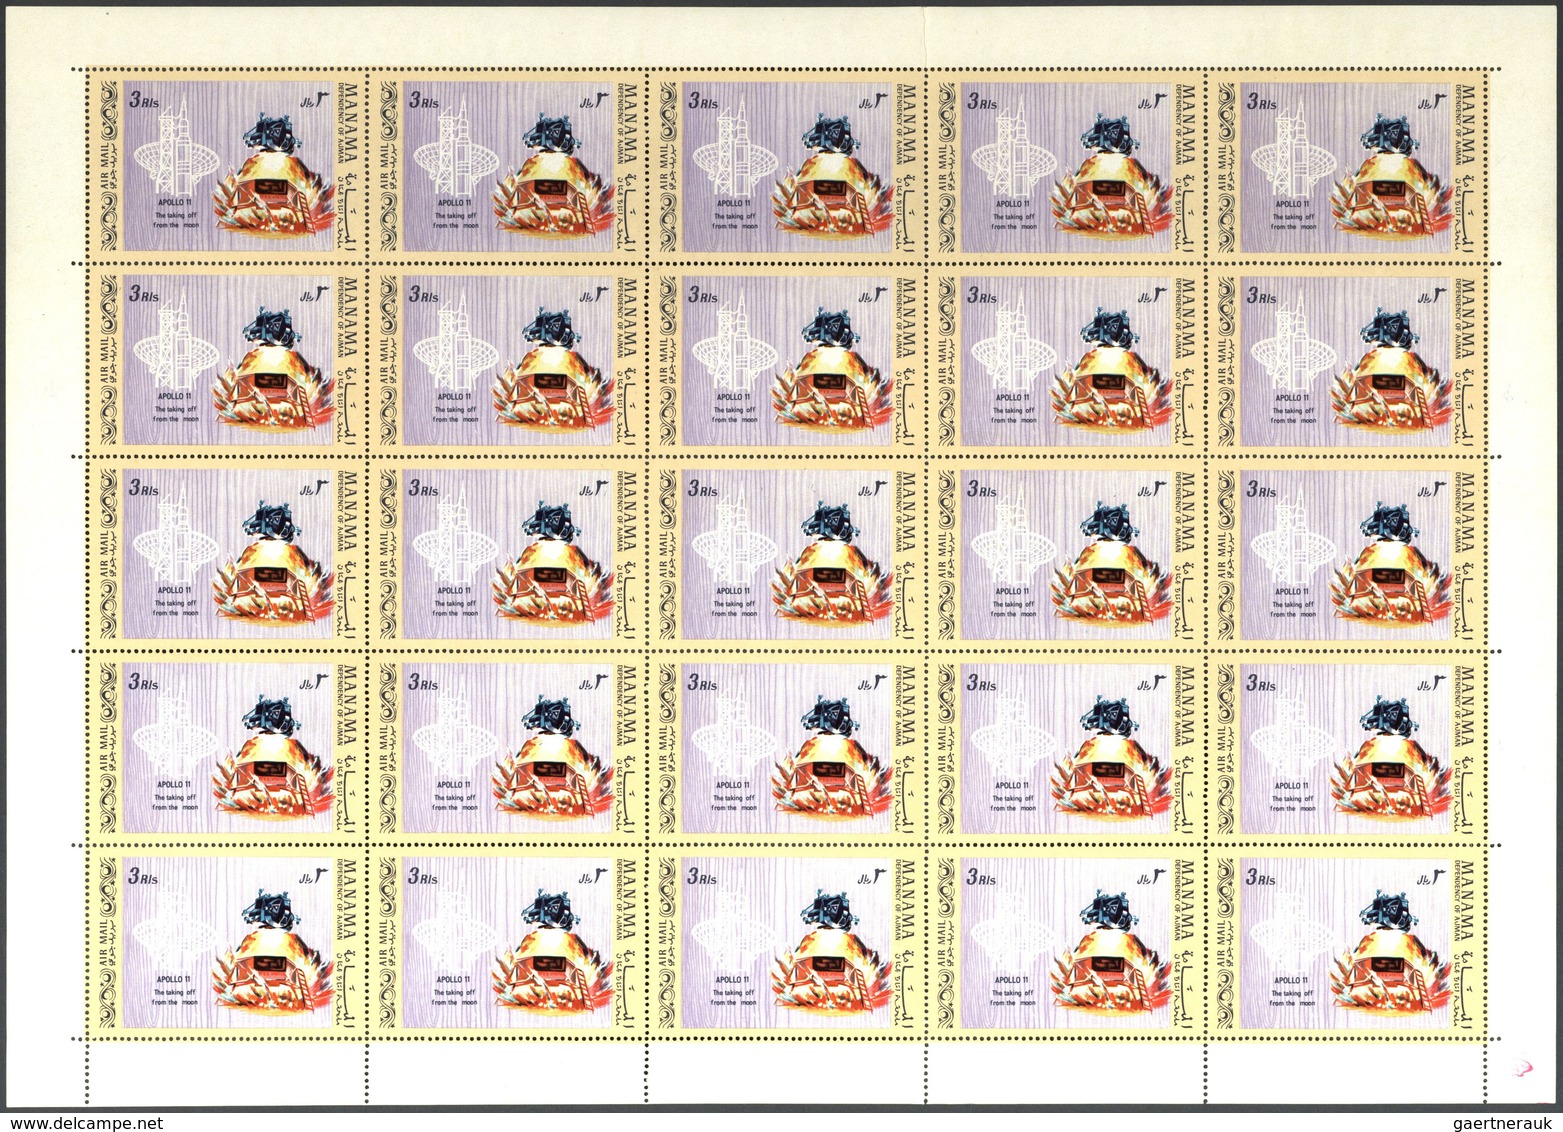 24670 Asien: 1964/1972 (ca.), ARAB STATES, comprehensive u/m accumulation of sheets and larger units in se